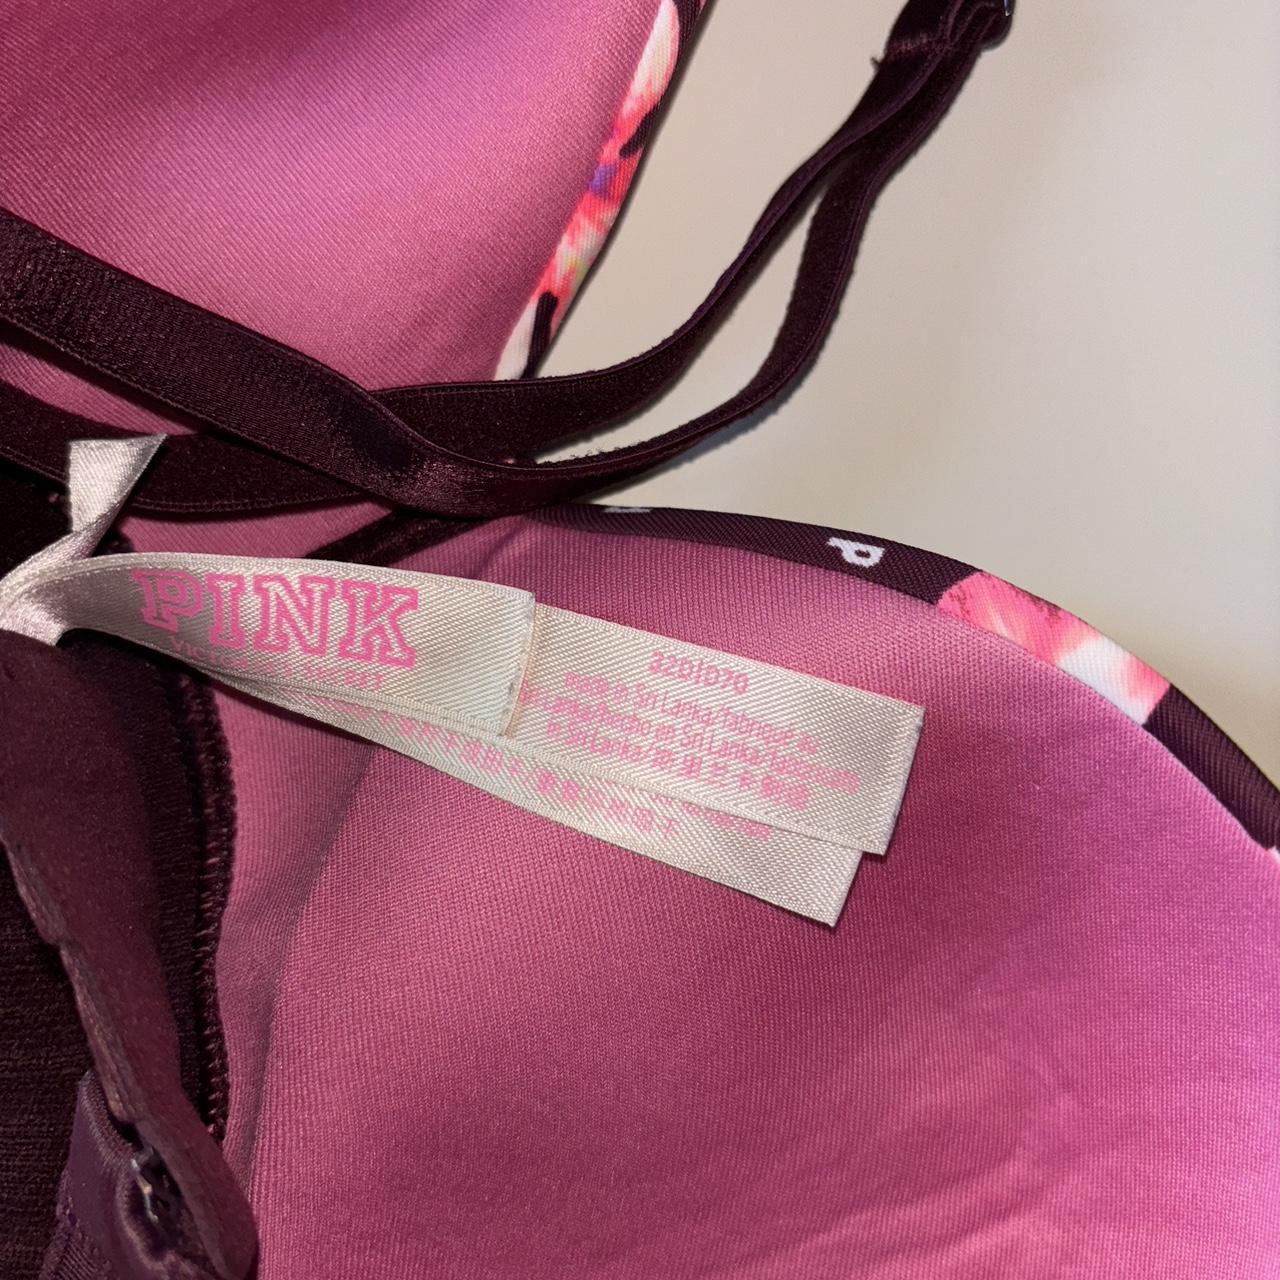 Floral Wireless Bra from PINK by VS 🌺, - Size 32D, 